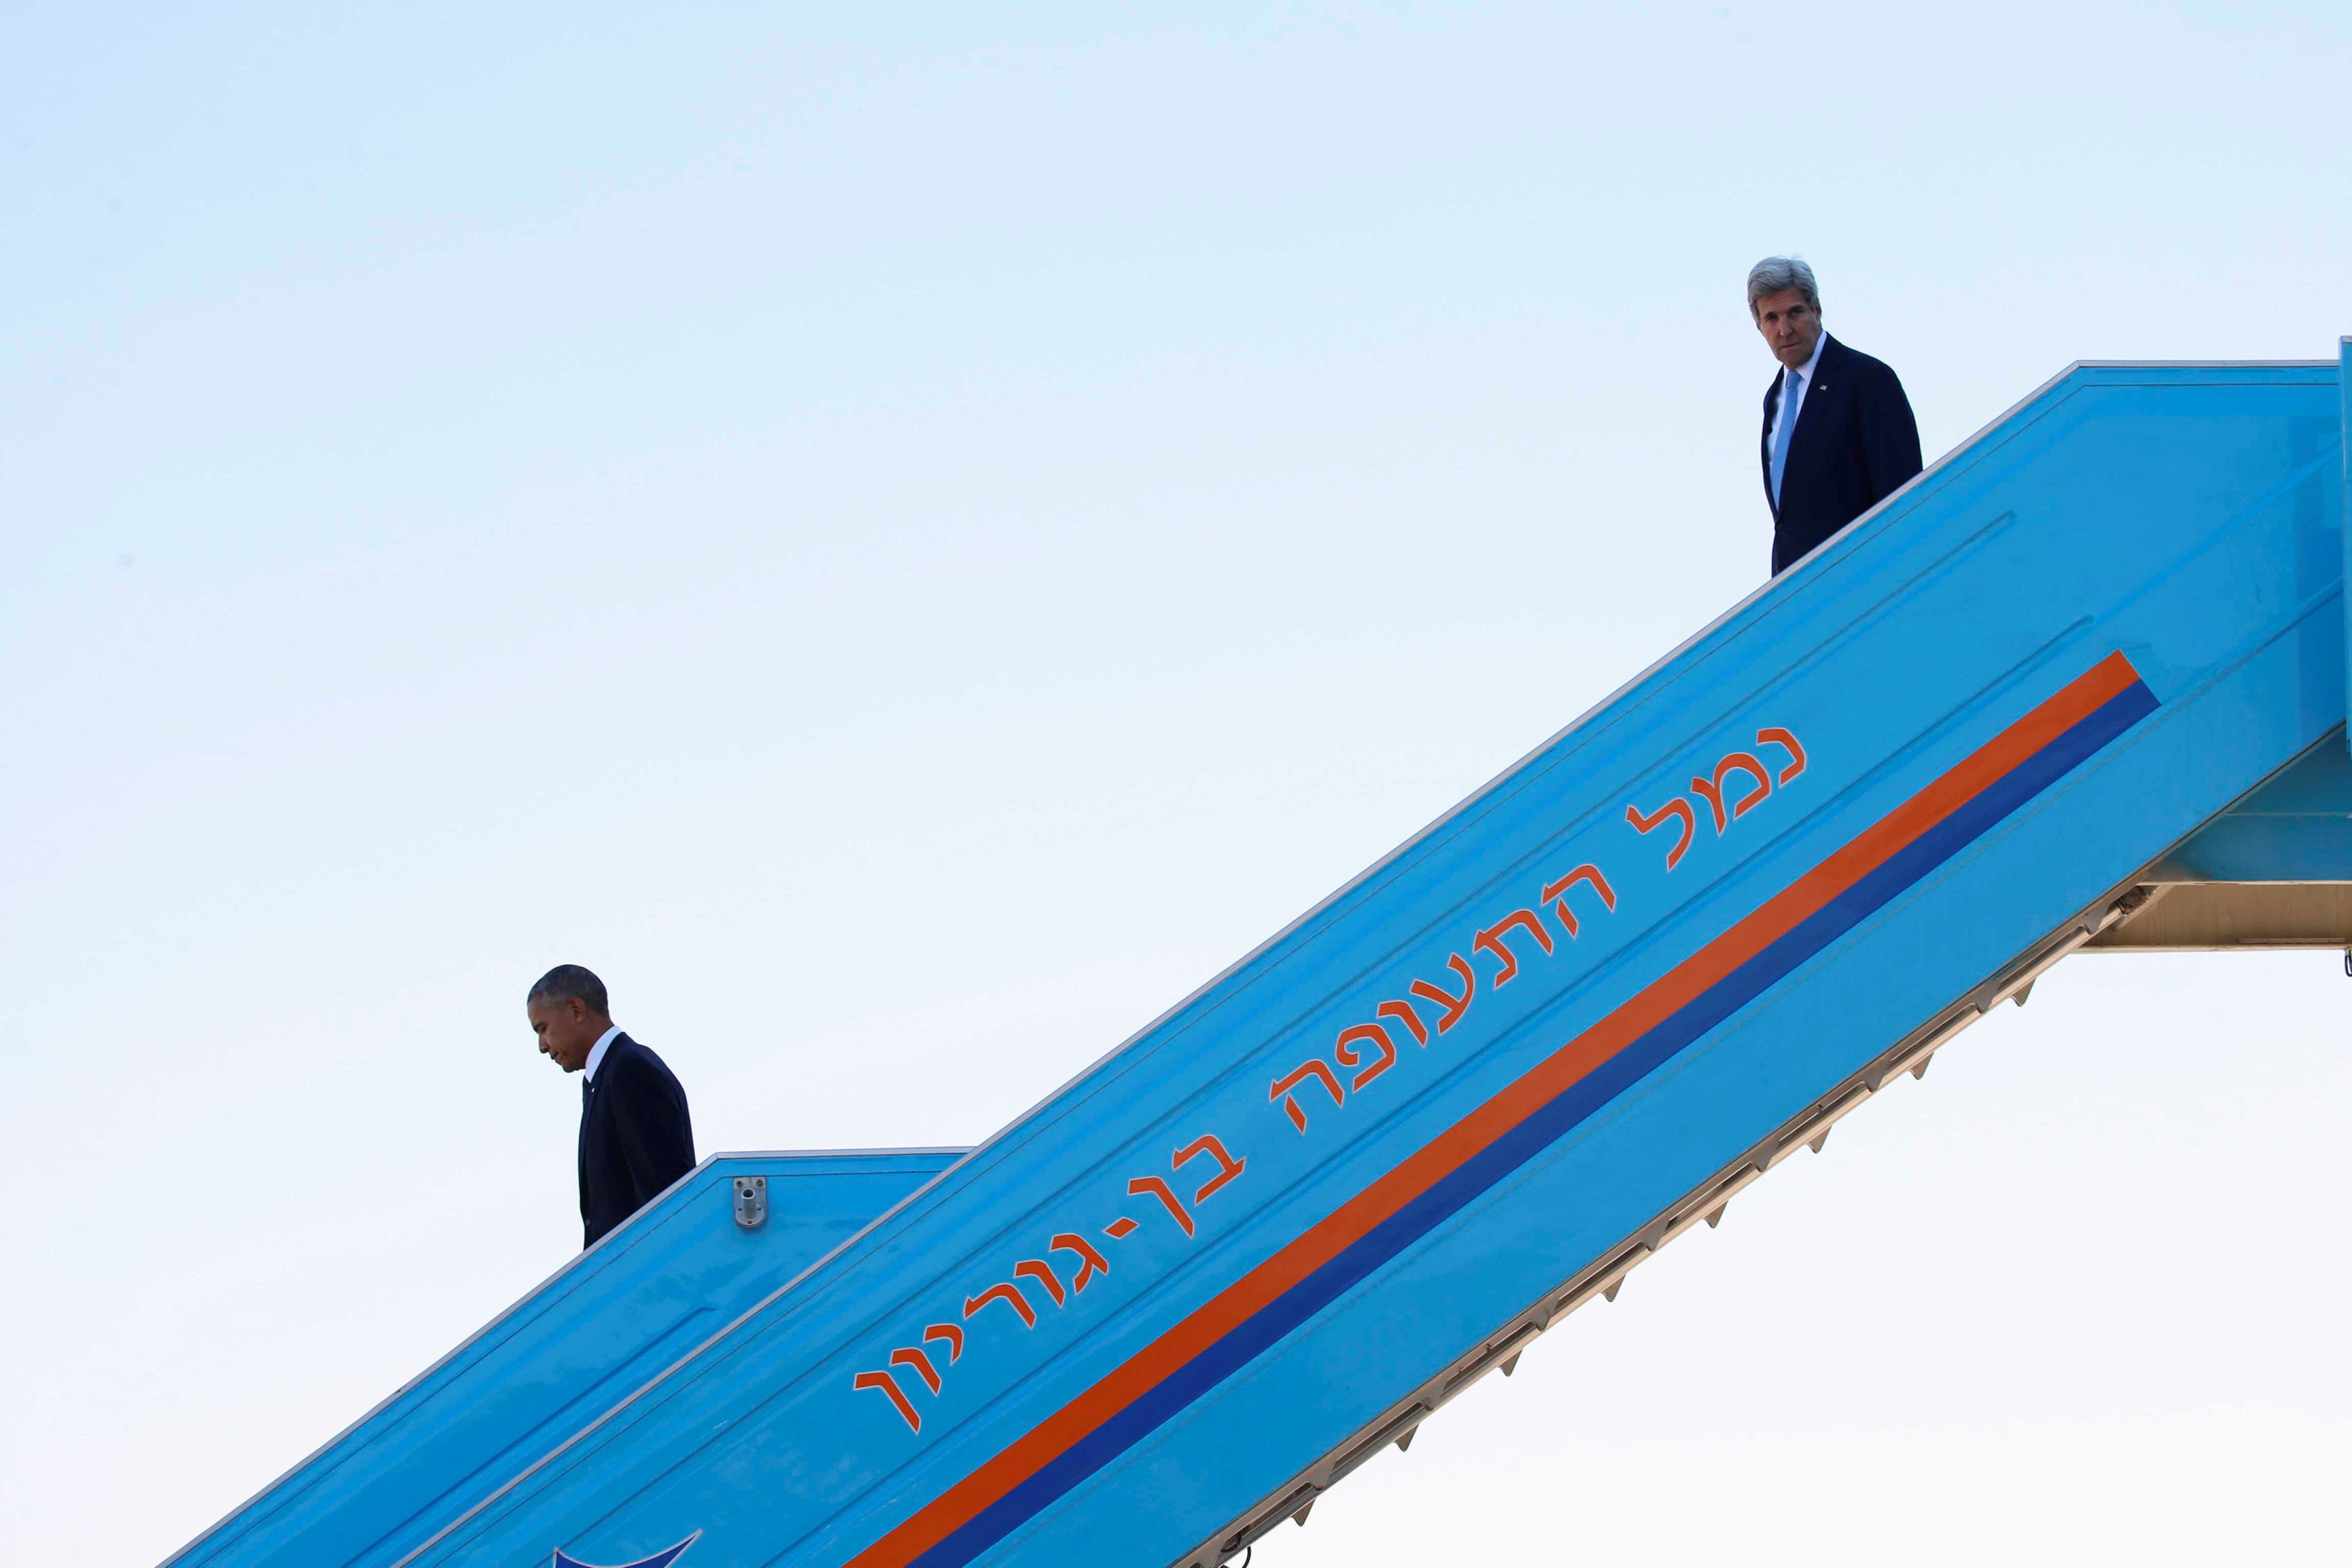 U.S President Barack Obama (L) and U.S. Secretary of State John Kerry disembark Air Force One upon landing at Israel's Ben Gurion International airport to attend the funeral of former Israeli President Shimon Peres, in Lod, Israel September 30, 2016.